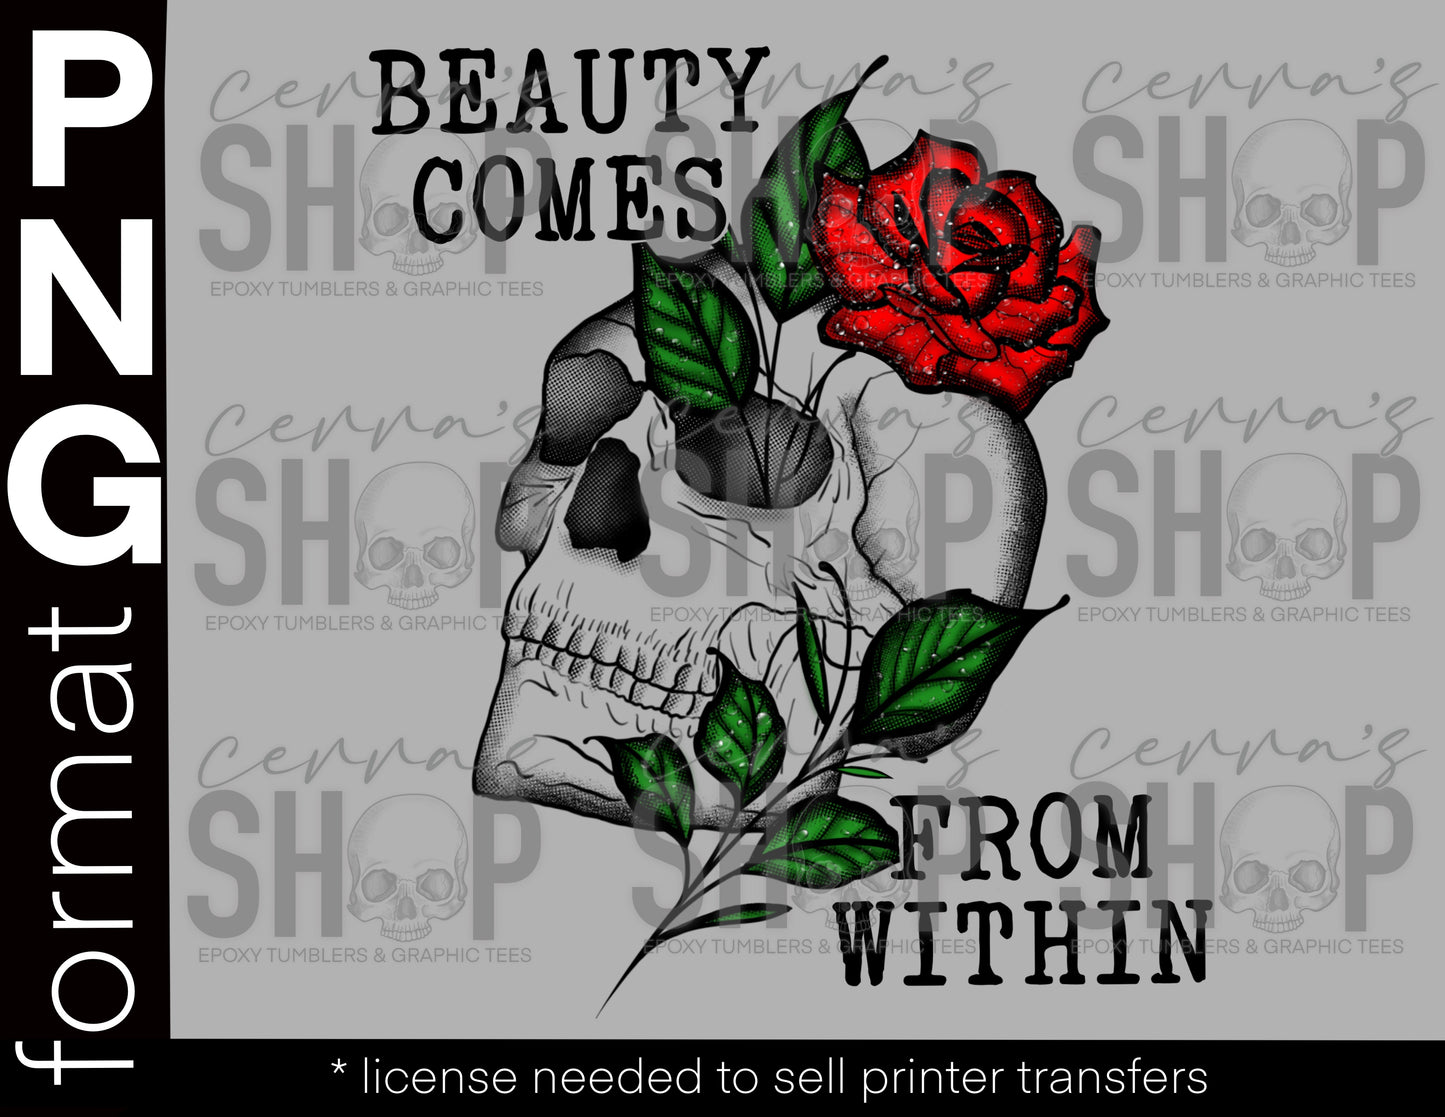 Beauty comes from within  Cerra's Shop Creates   